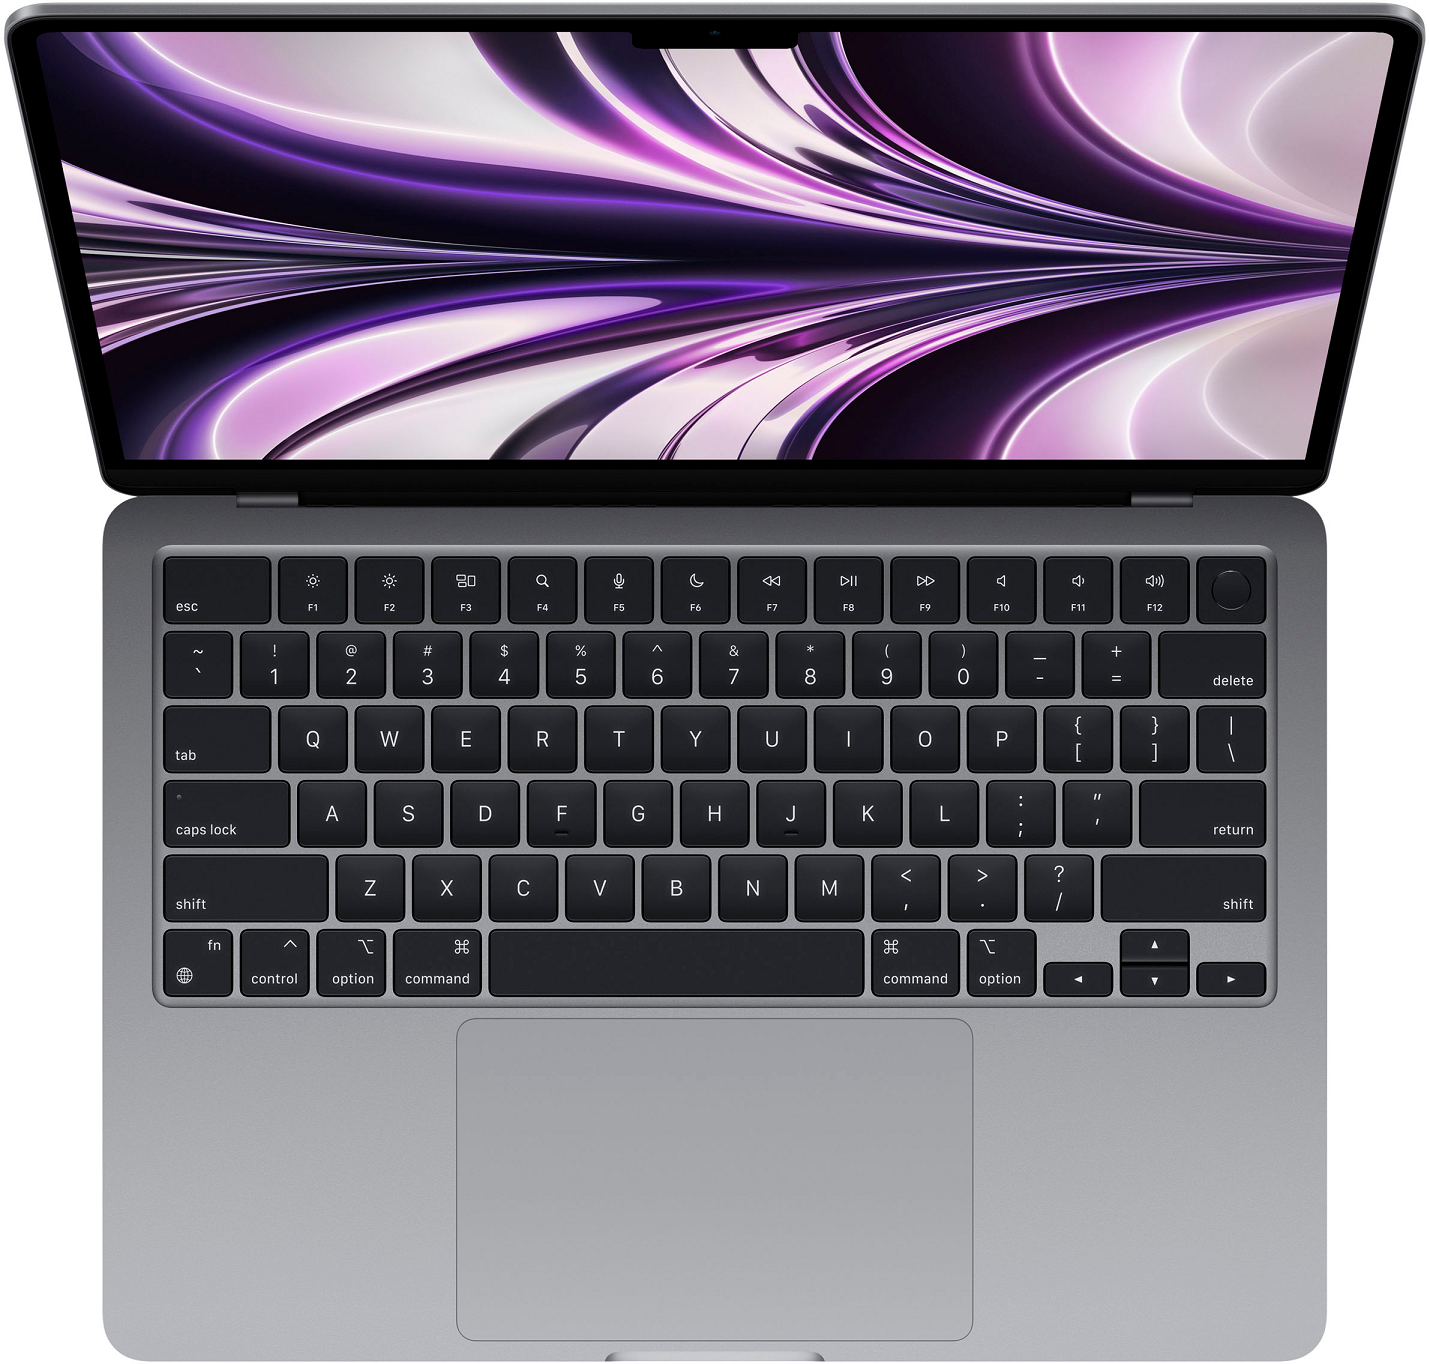 MacBook Air 13.6in Laptop - Apple M2 chip - 8GB Memory - 256GB SSD (Latest Model) - Space Gray